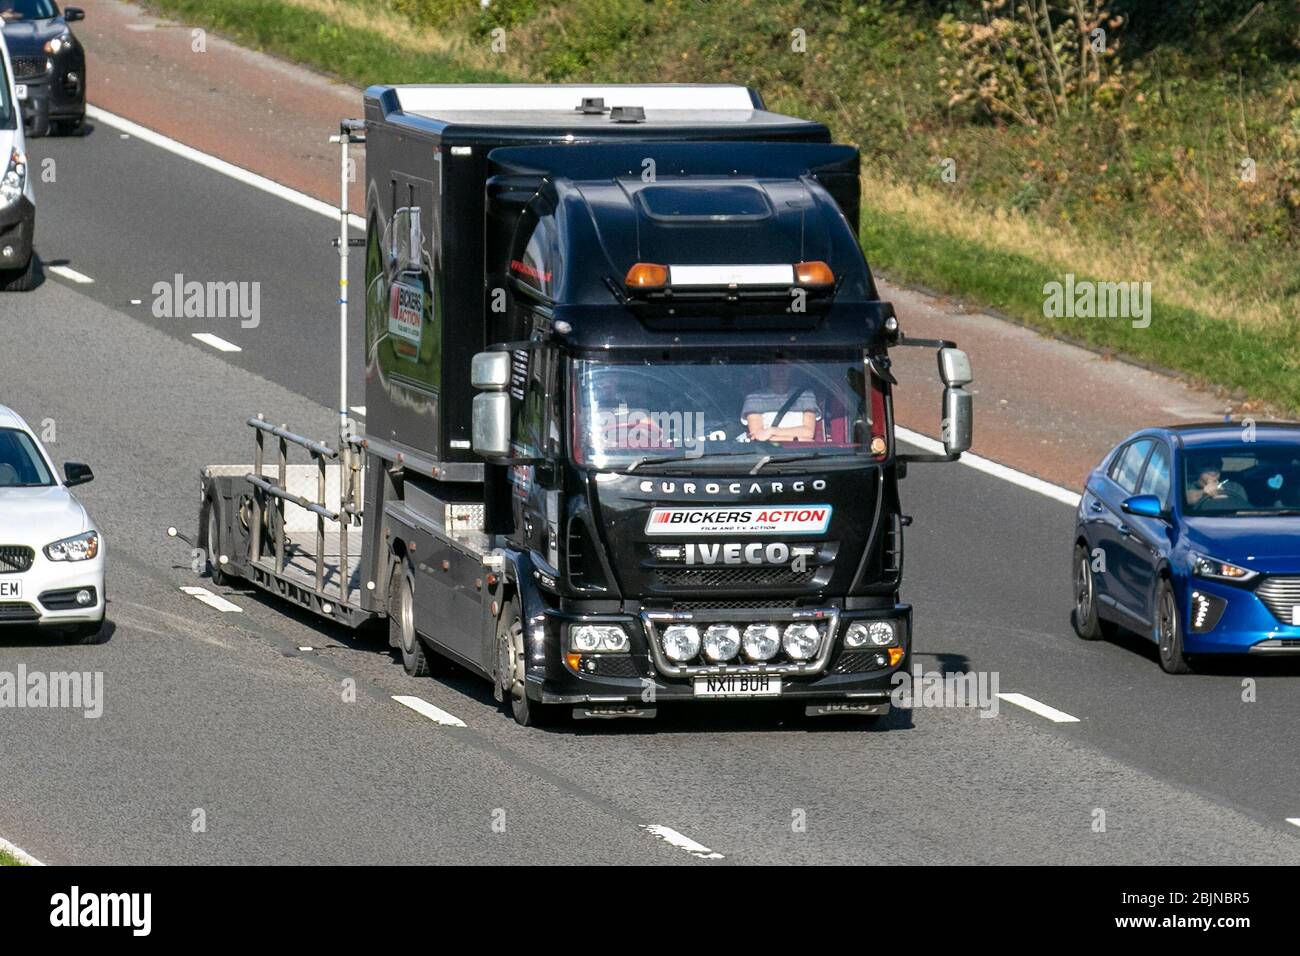 Bickers Action, Film & Tv Action; Eurocargo Haulage delivery trucks, lorry, transportation, truck, cargo carrier, Iveco vehicle, European commercial transport, industry, M6 at Lancaster, UK Stock Photo